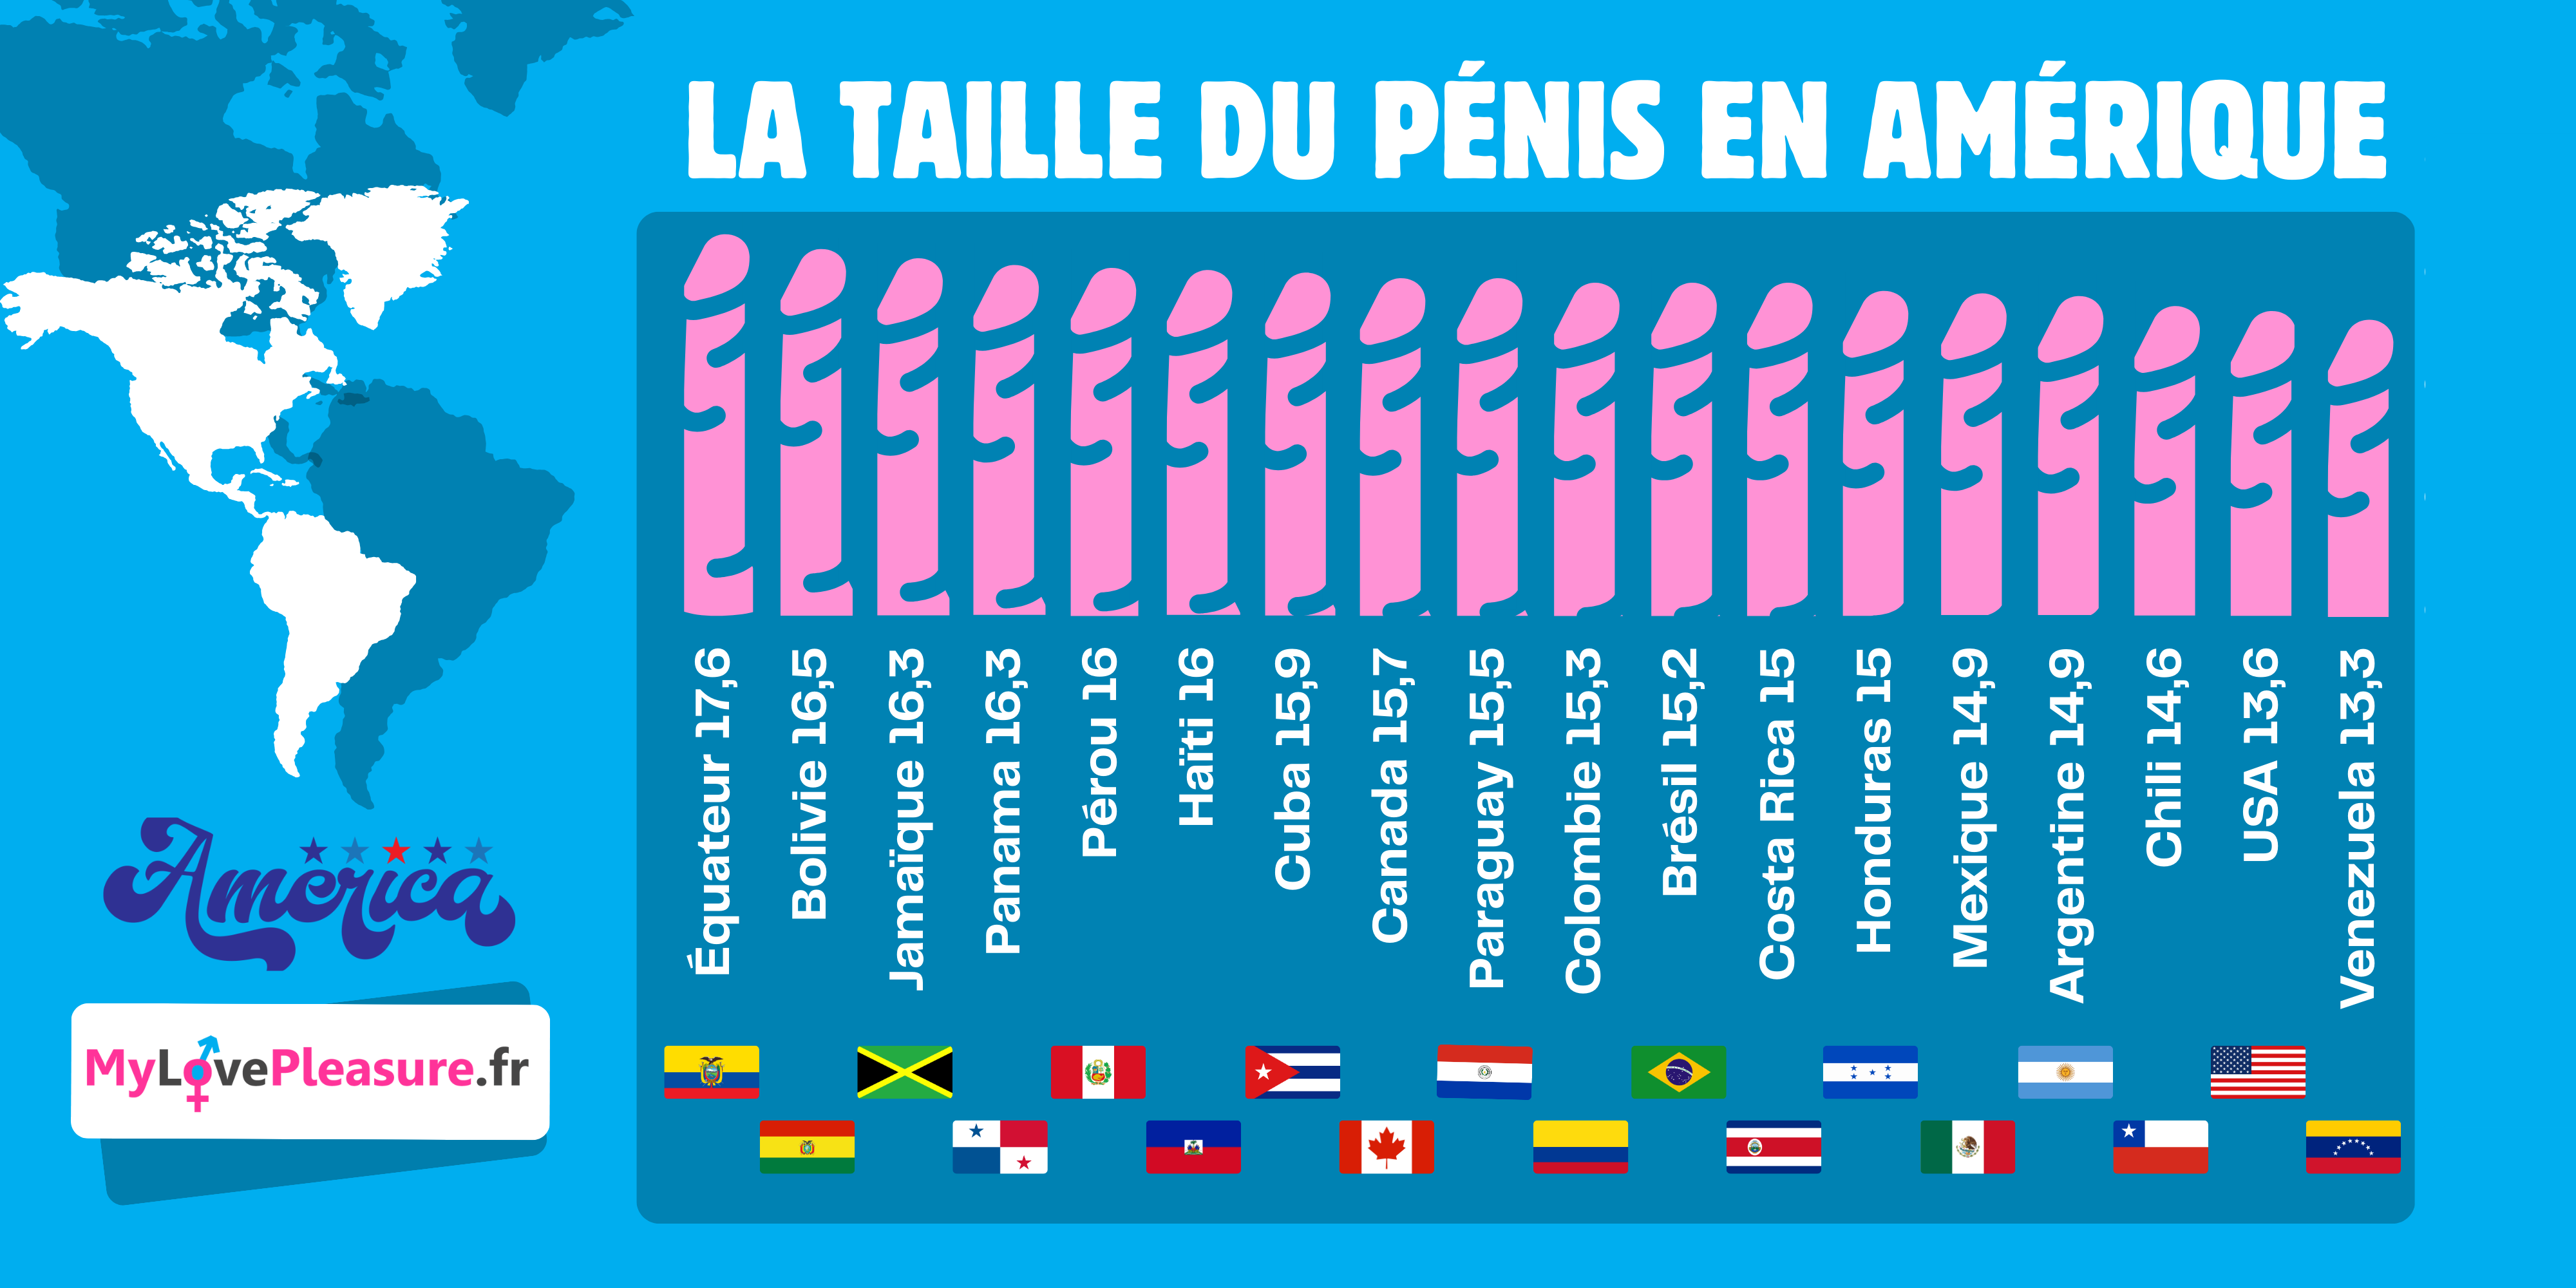 taille moyenne penis amerique USA - Canada